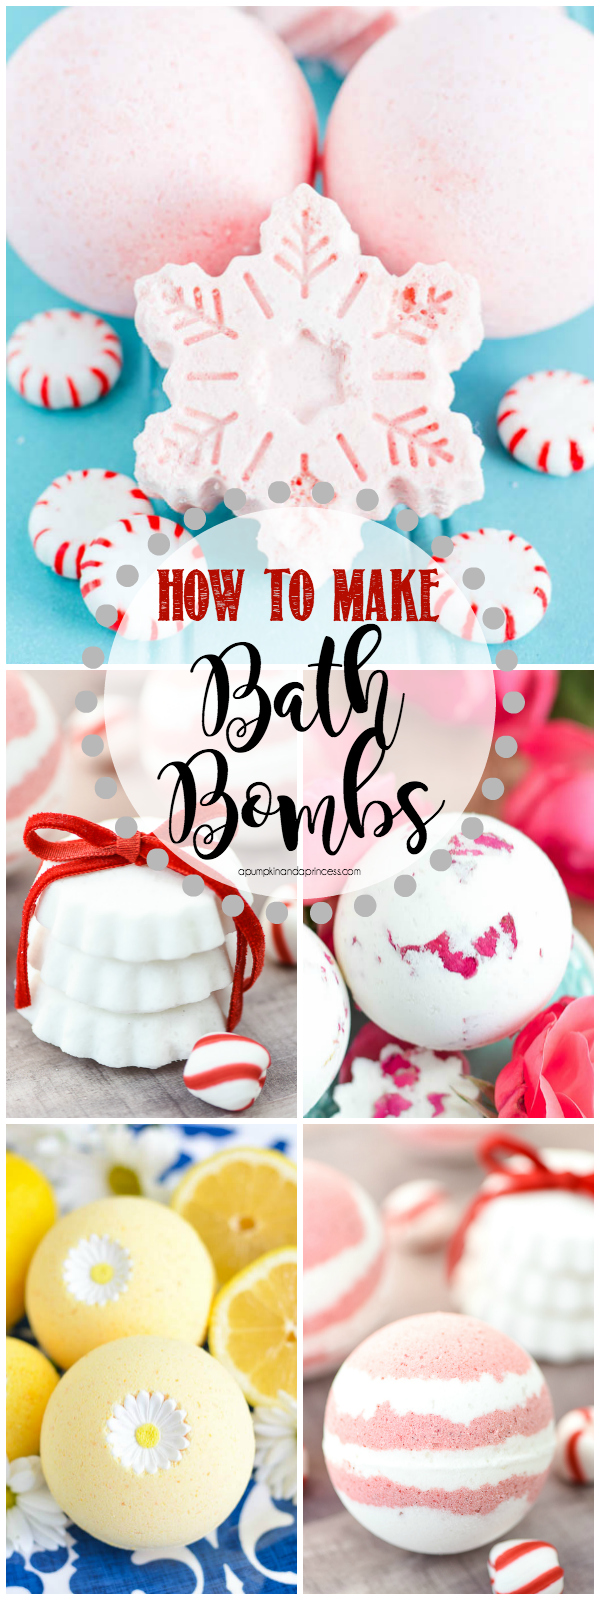 HOW TO MAKE BATH BOMBS – create your own bath bombs at home with this easy video tutorial and recipe!